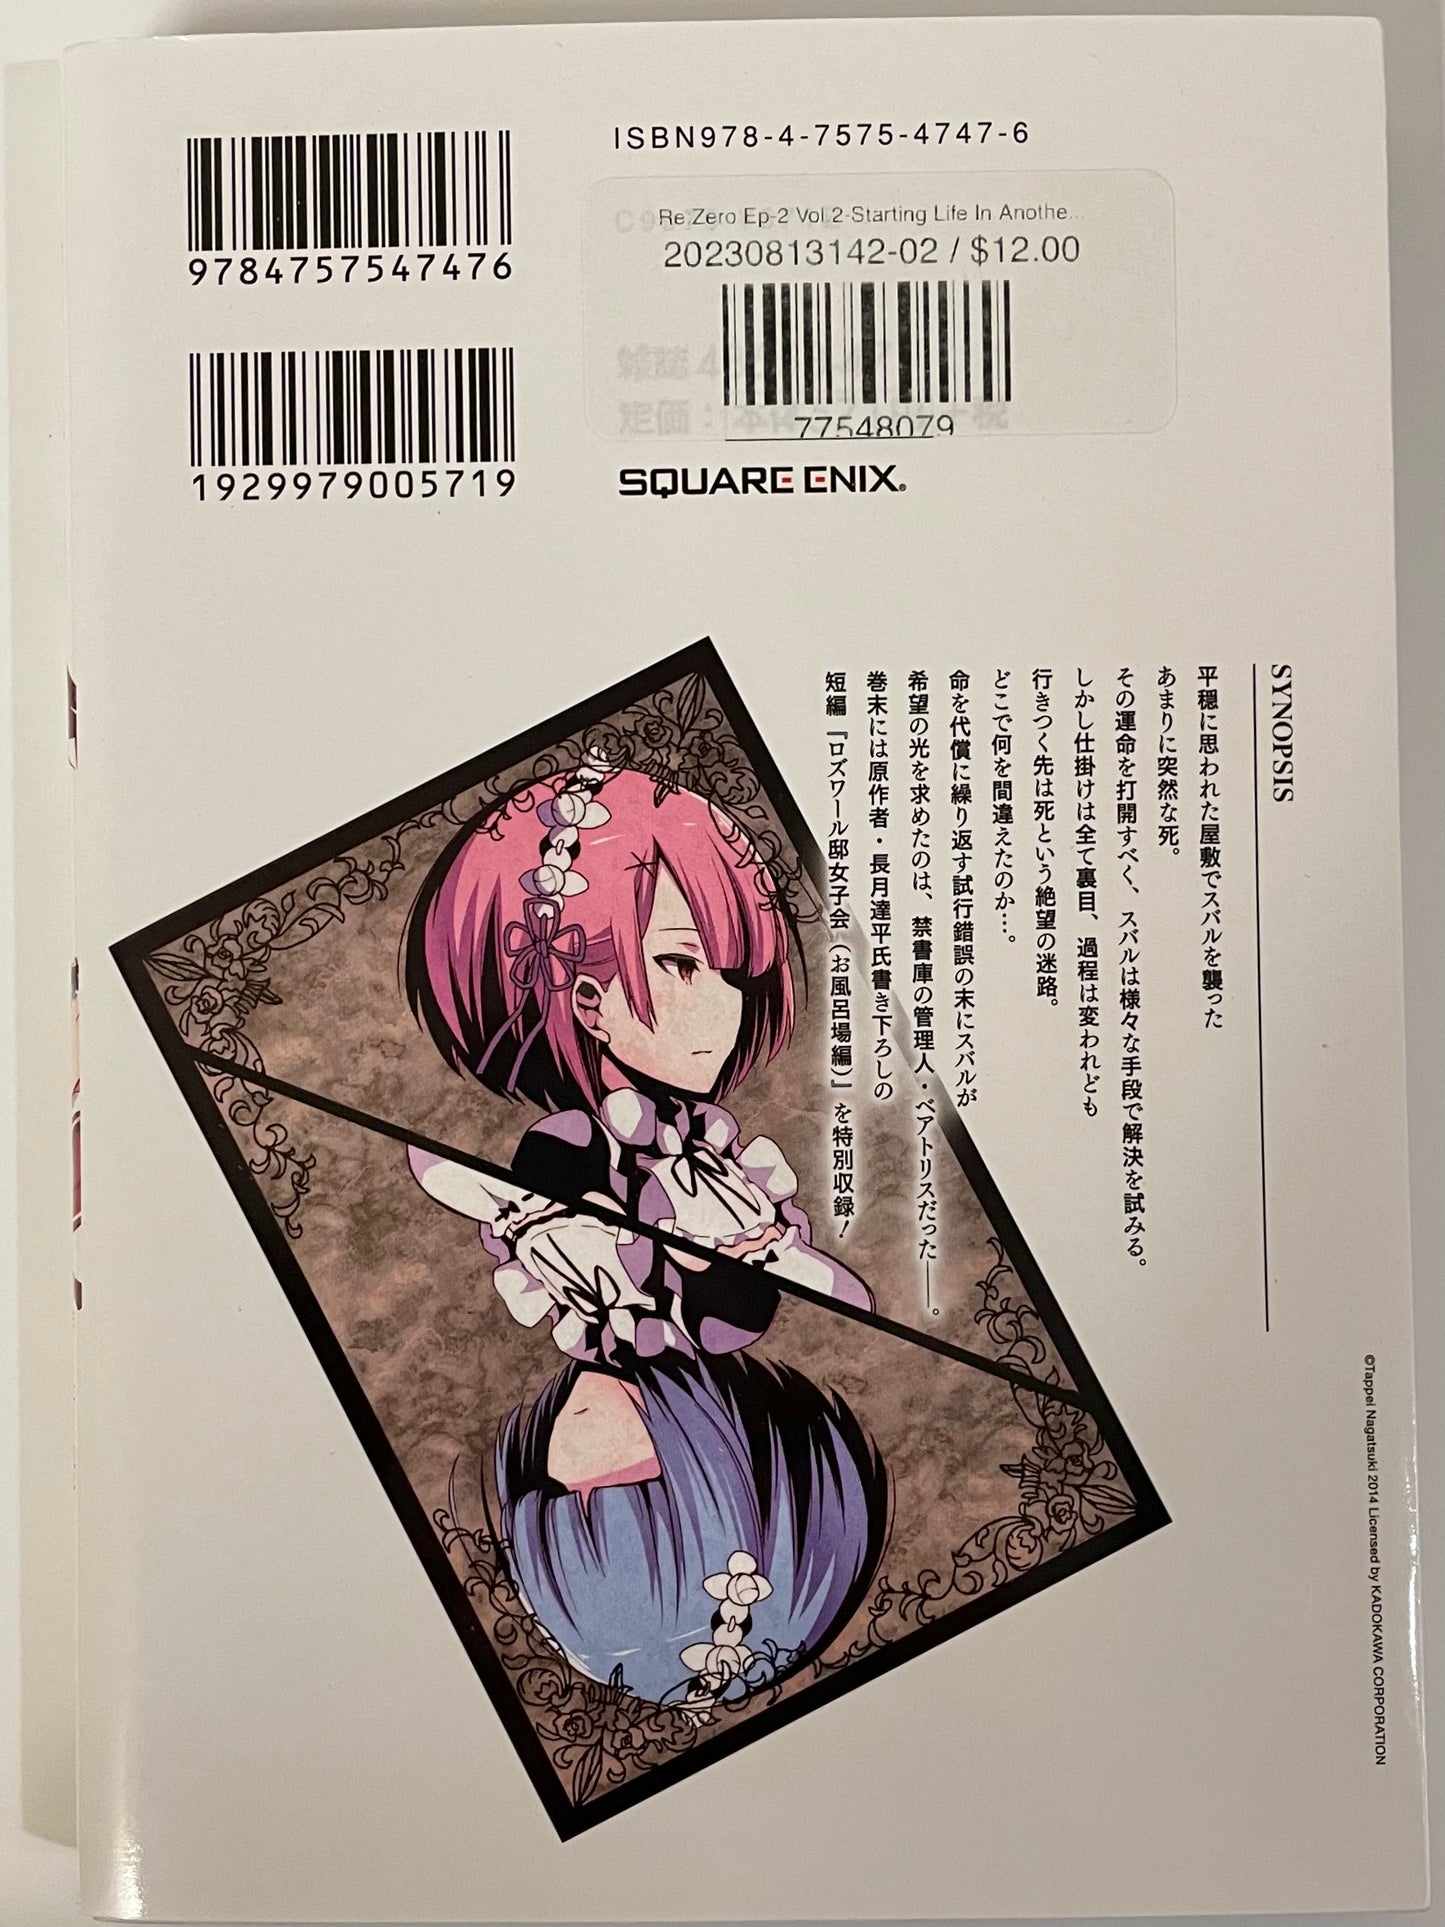 Re:Zero Ep-2 Vol.2-Starting Life In Another World-Official Japanese Edition